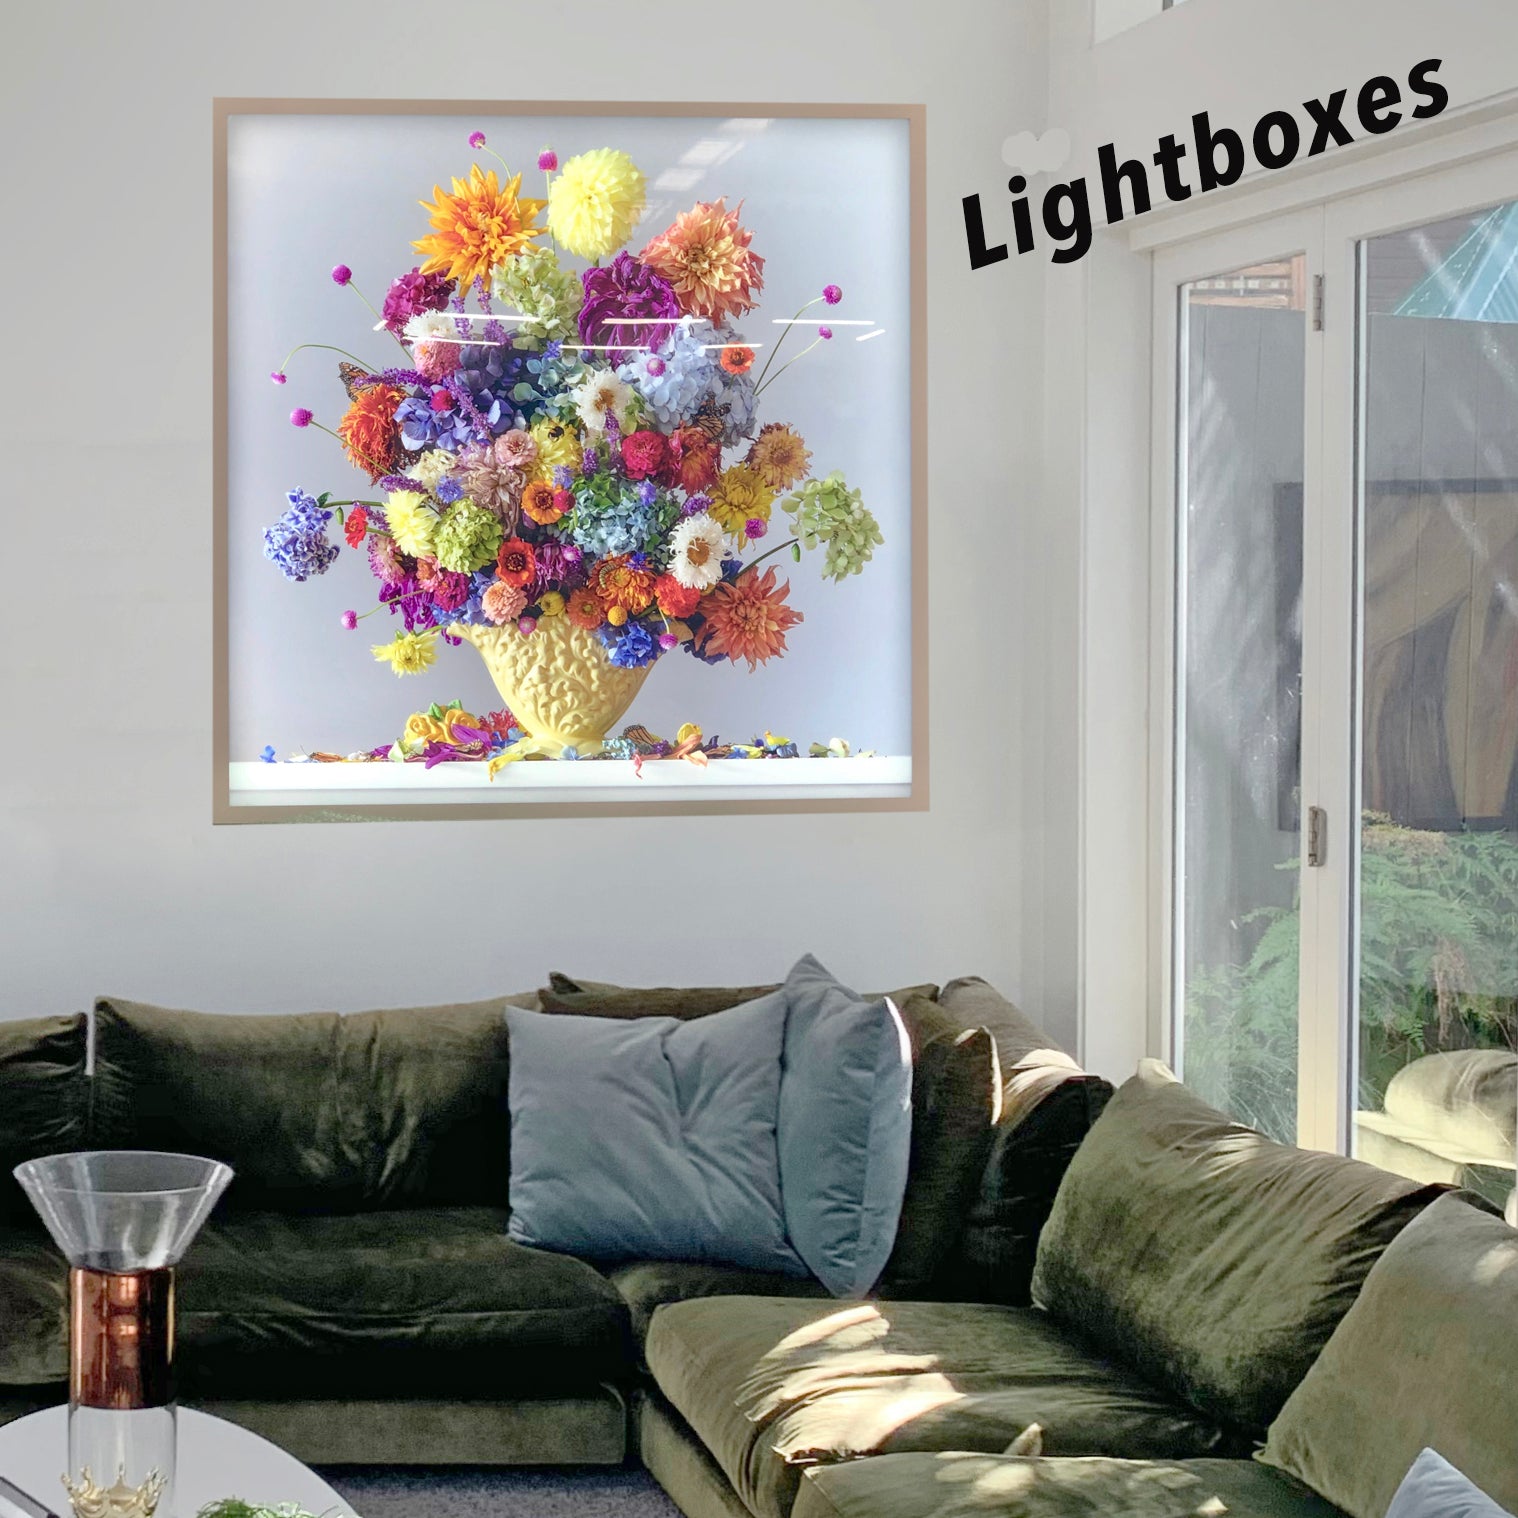 Lightboxes ...